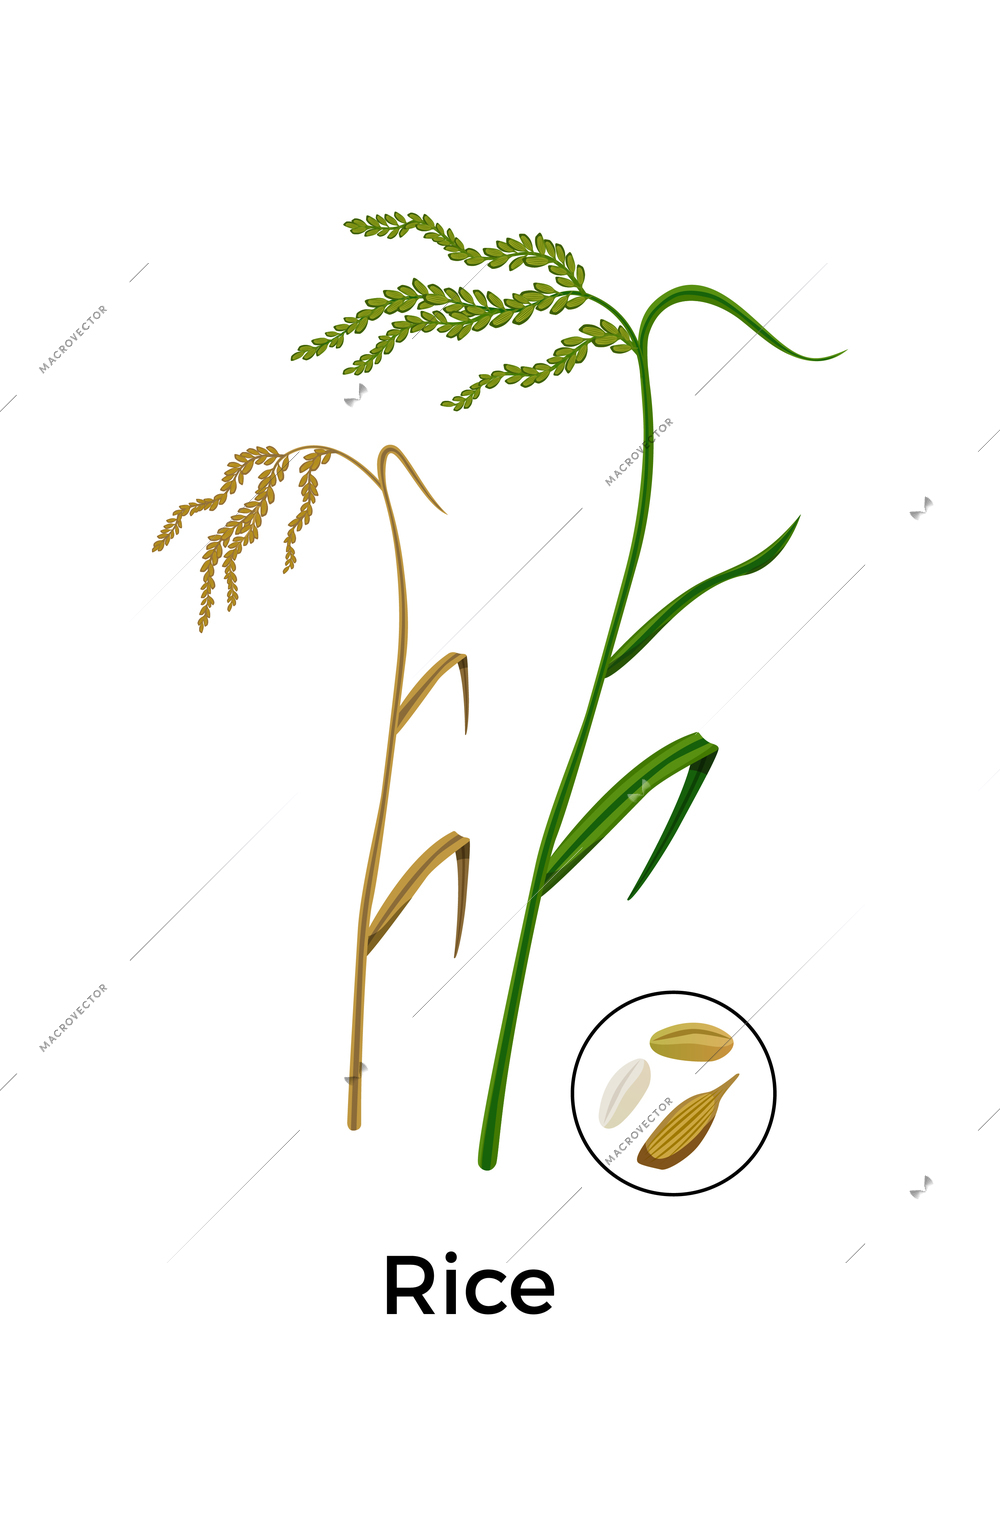 Cereal plants seeds botanical composition with images of rice plants with round icon of seeds vector illustration